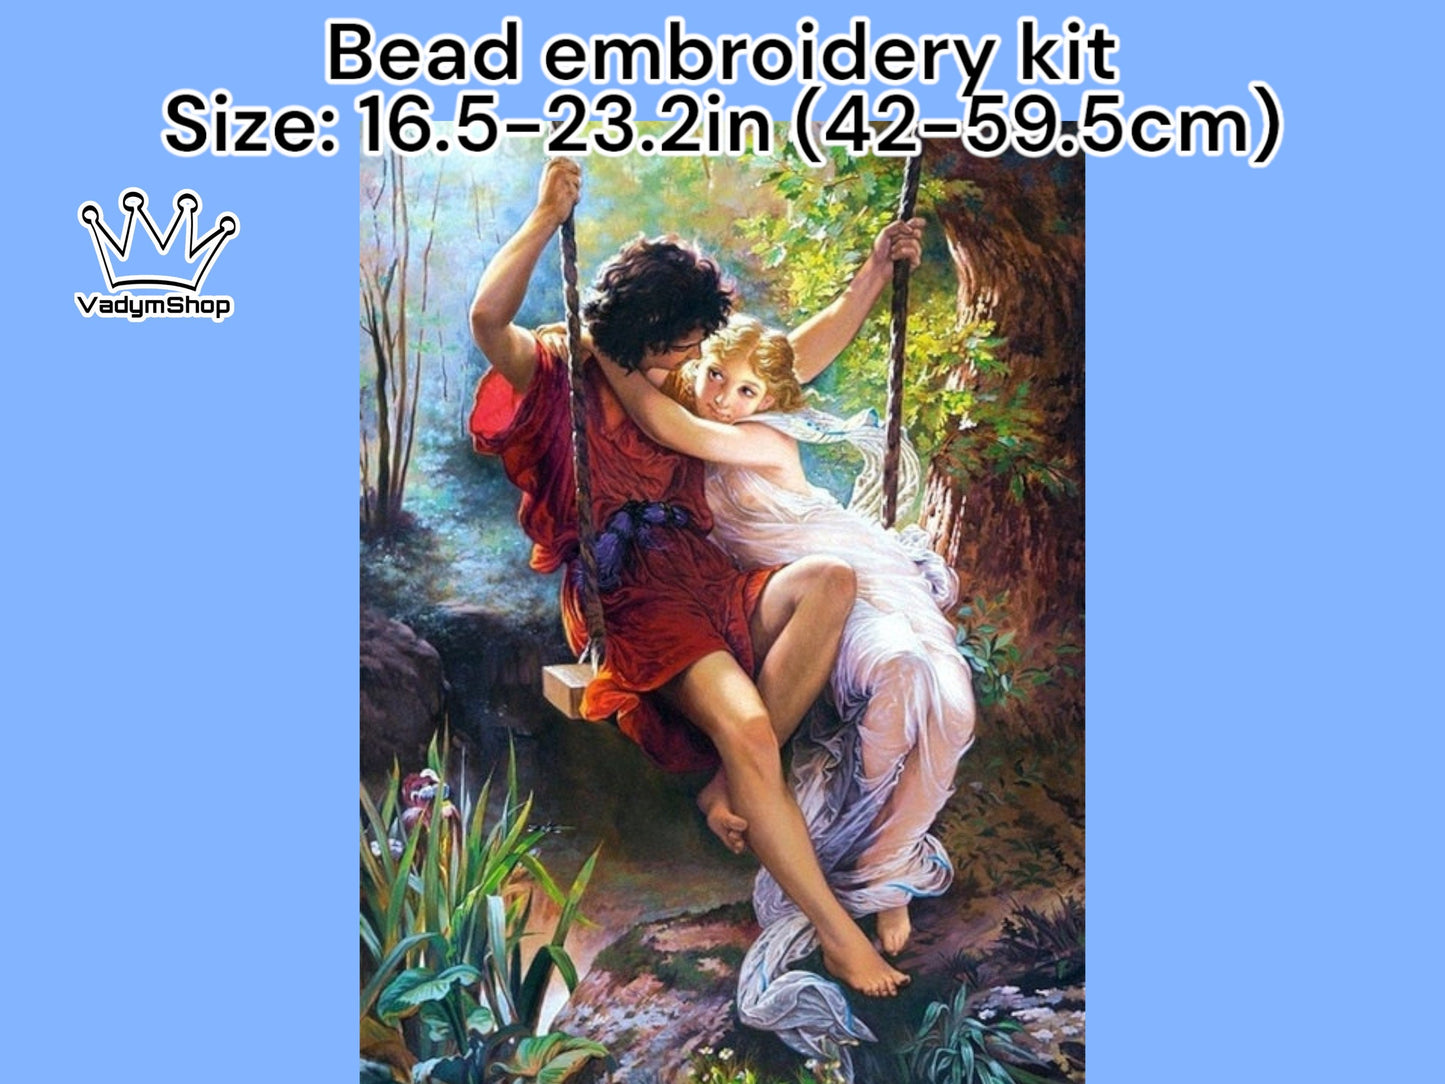 DIY Bead embroidery kit "On a swing". size: 16.5-23.2in (42 - 59.5cm). - VadymShop